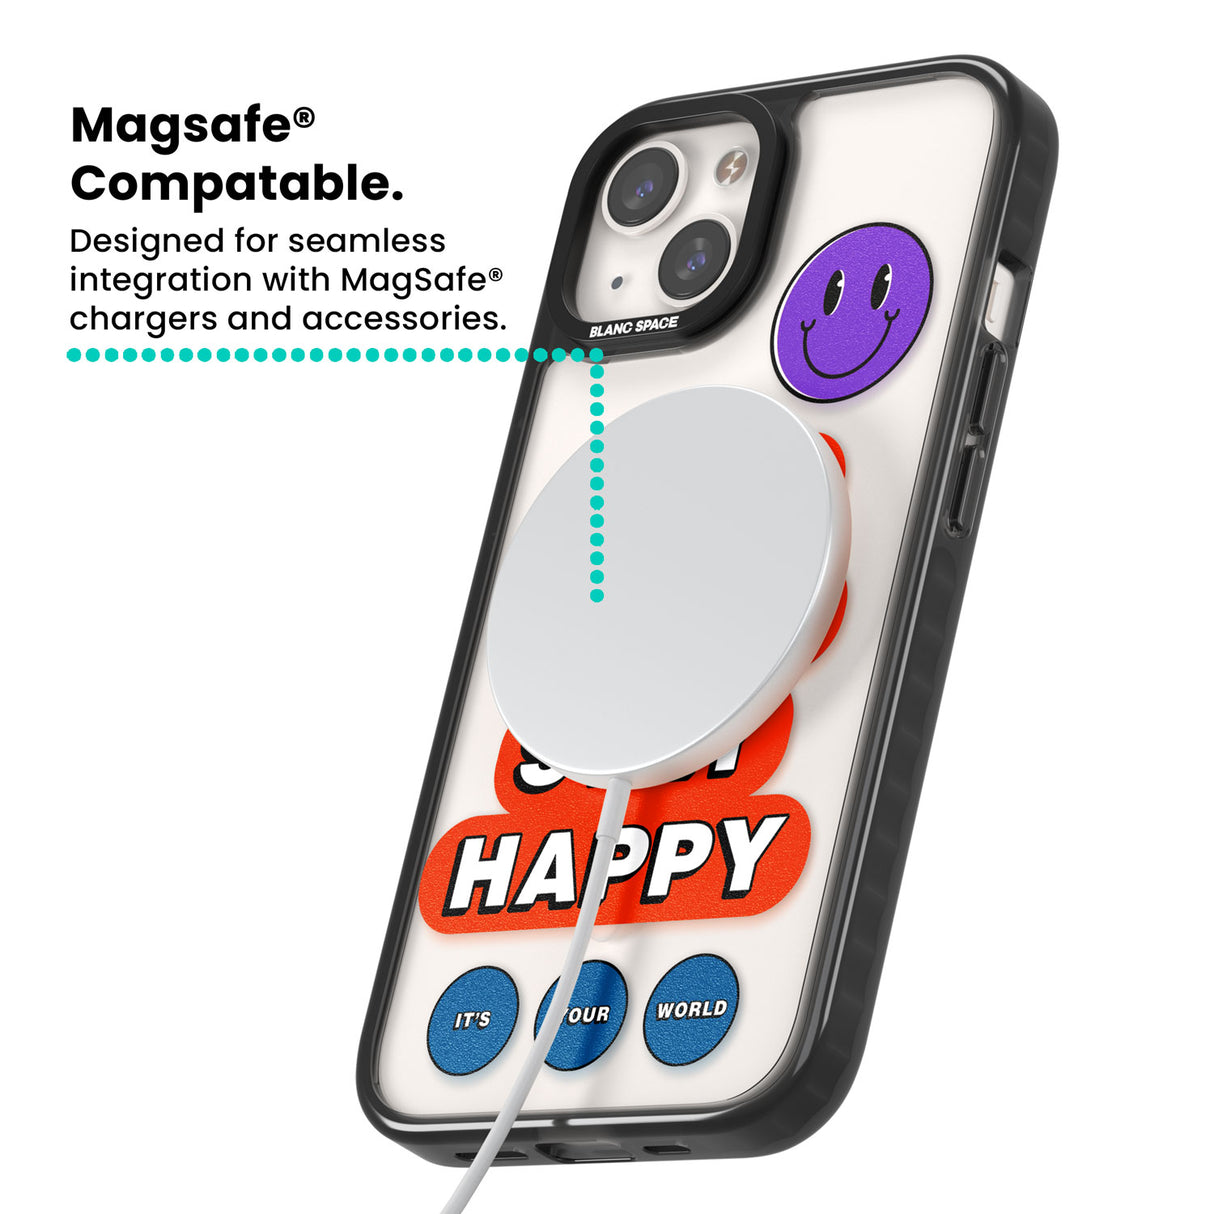 Keep Going Stay Happy Magsafe Black Impact Phone Case for iPhone 13, iPhone 14, iPhone 15